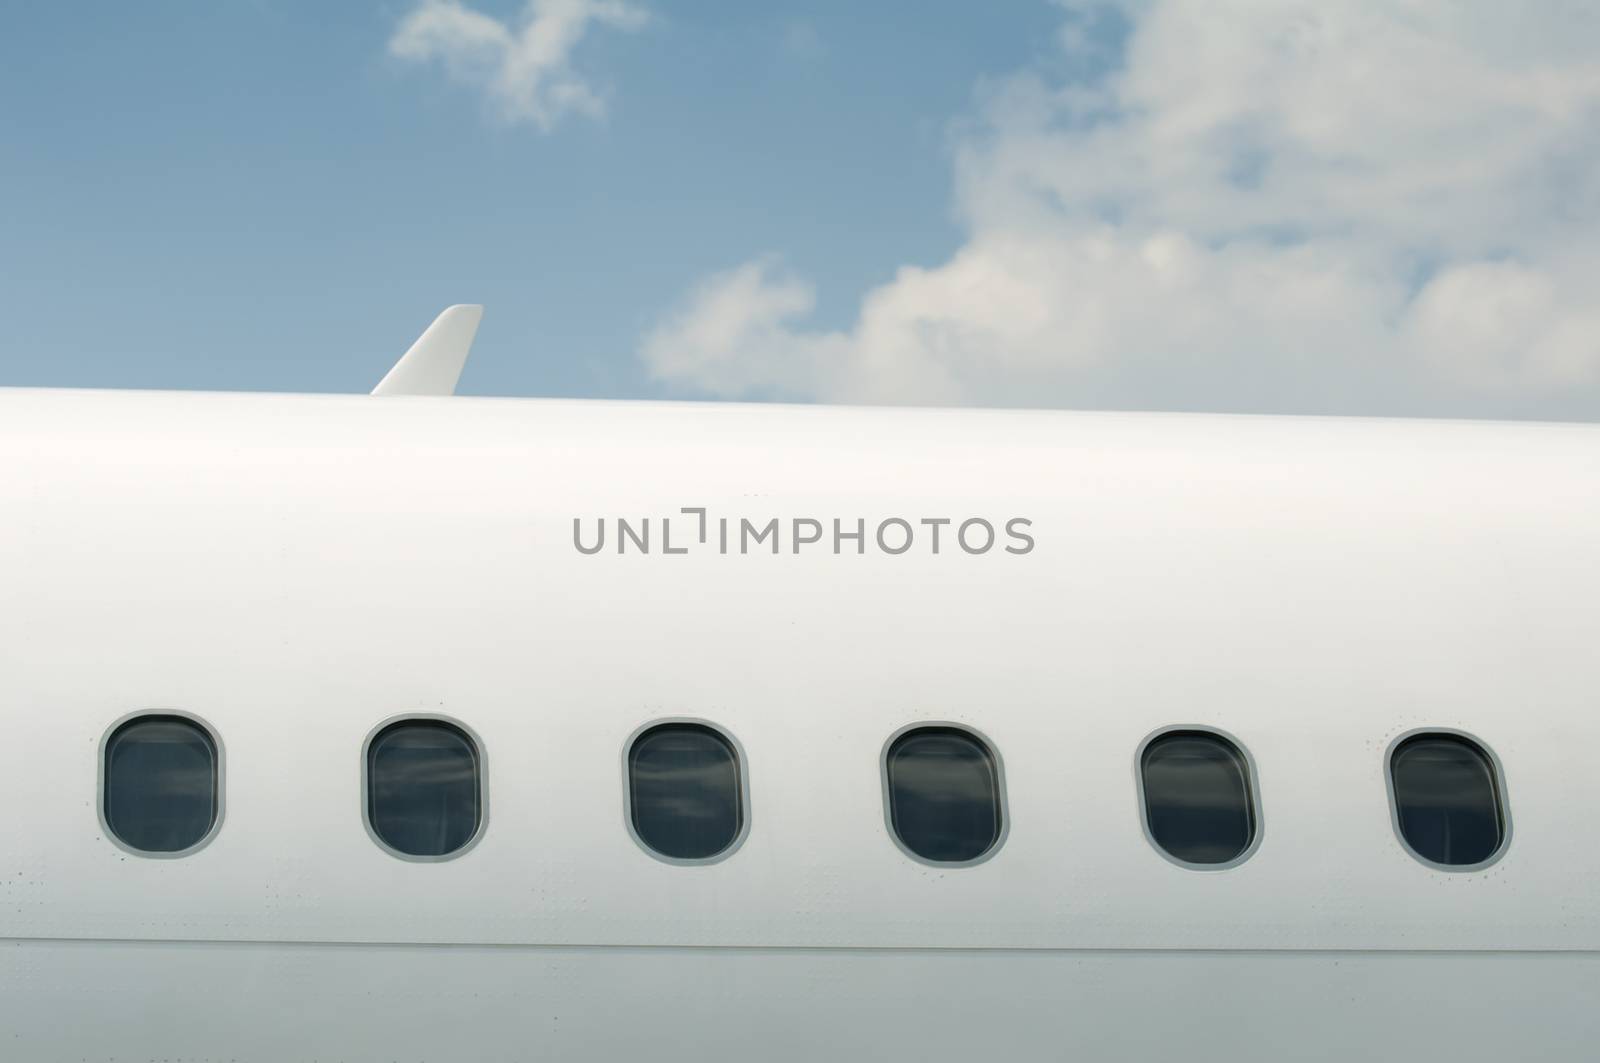 Windows of an airplane outside. White color plane